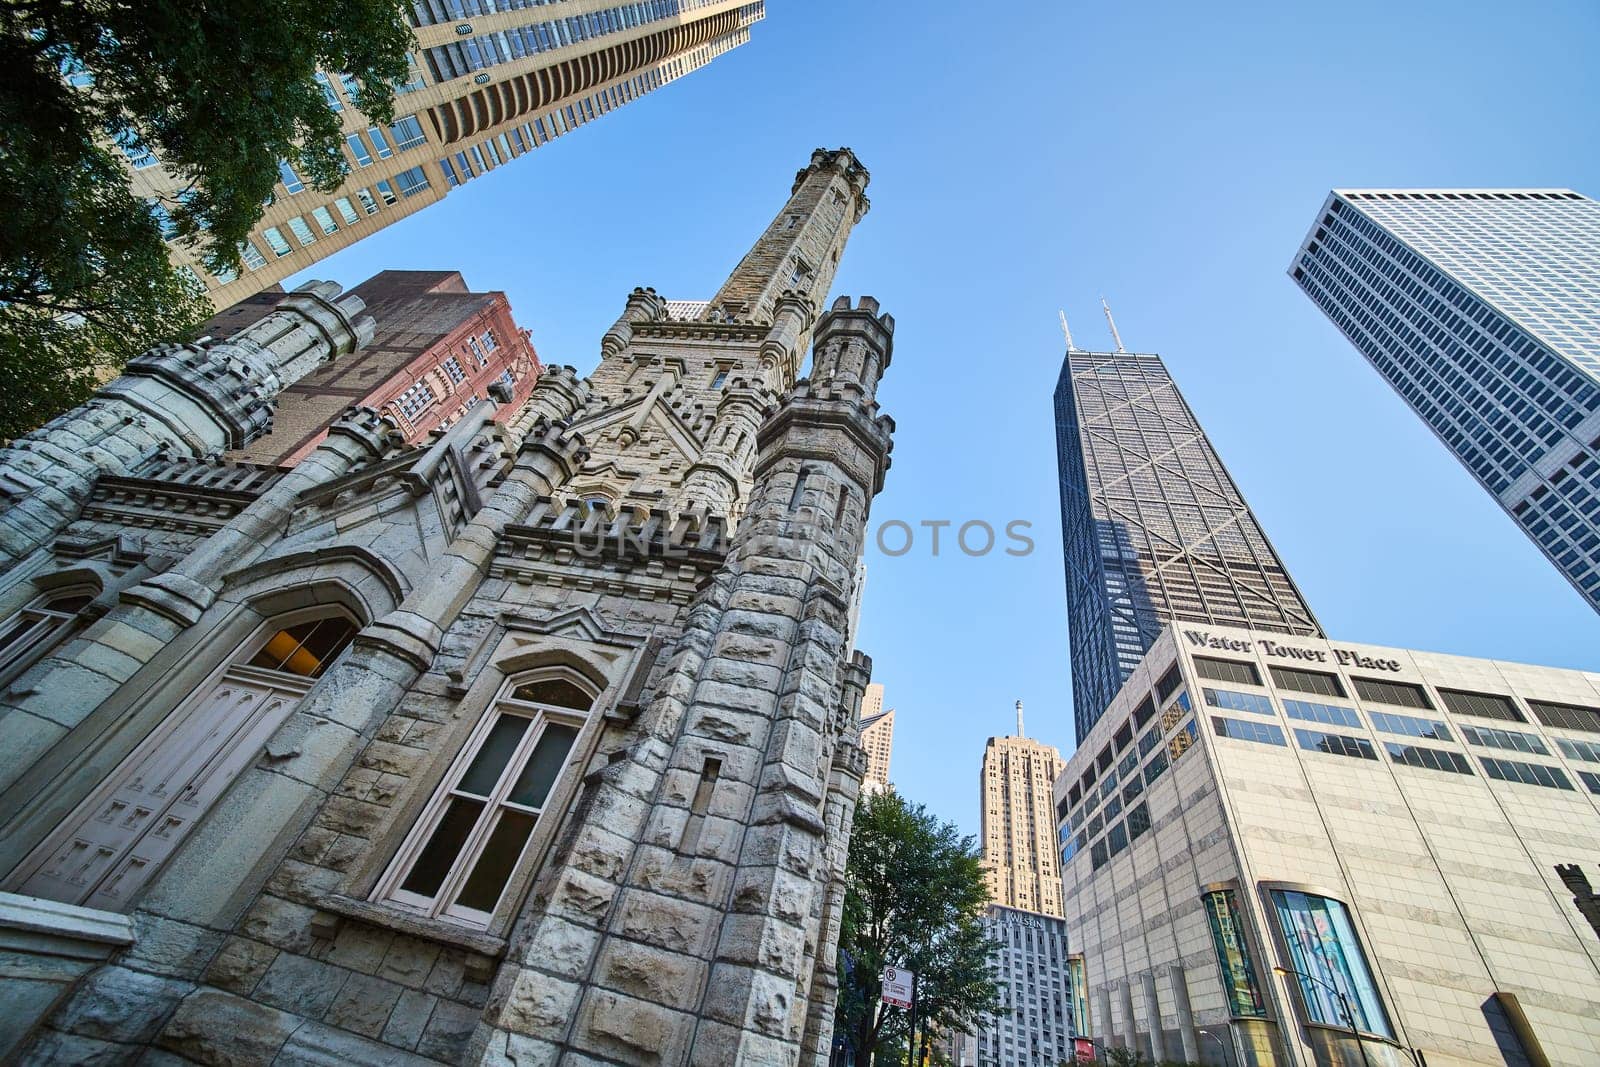 Castle architecture of Chicago original, historic water tower under blue sky with city skyscrapers by njproductions